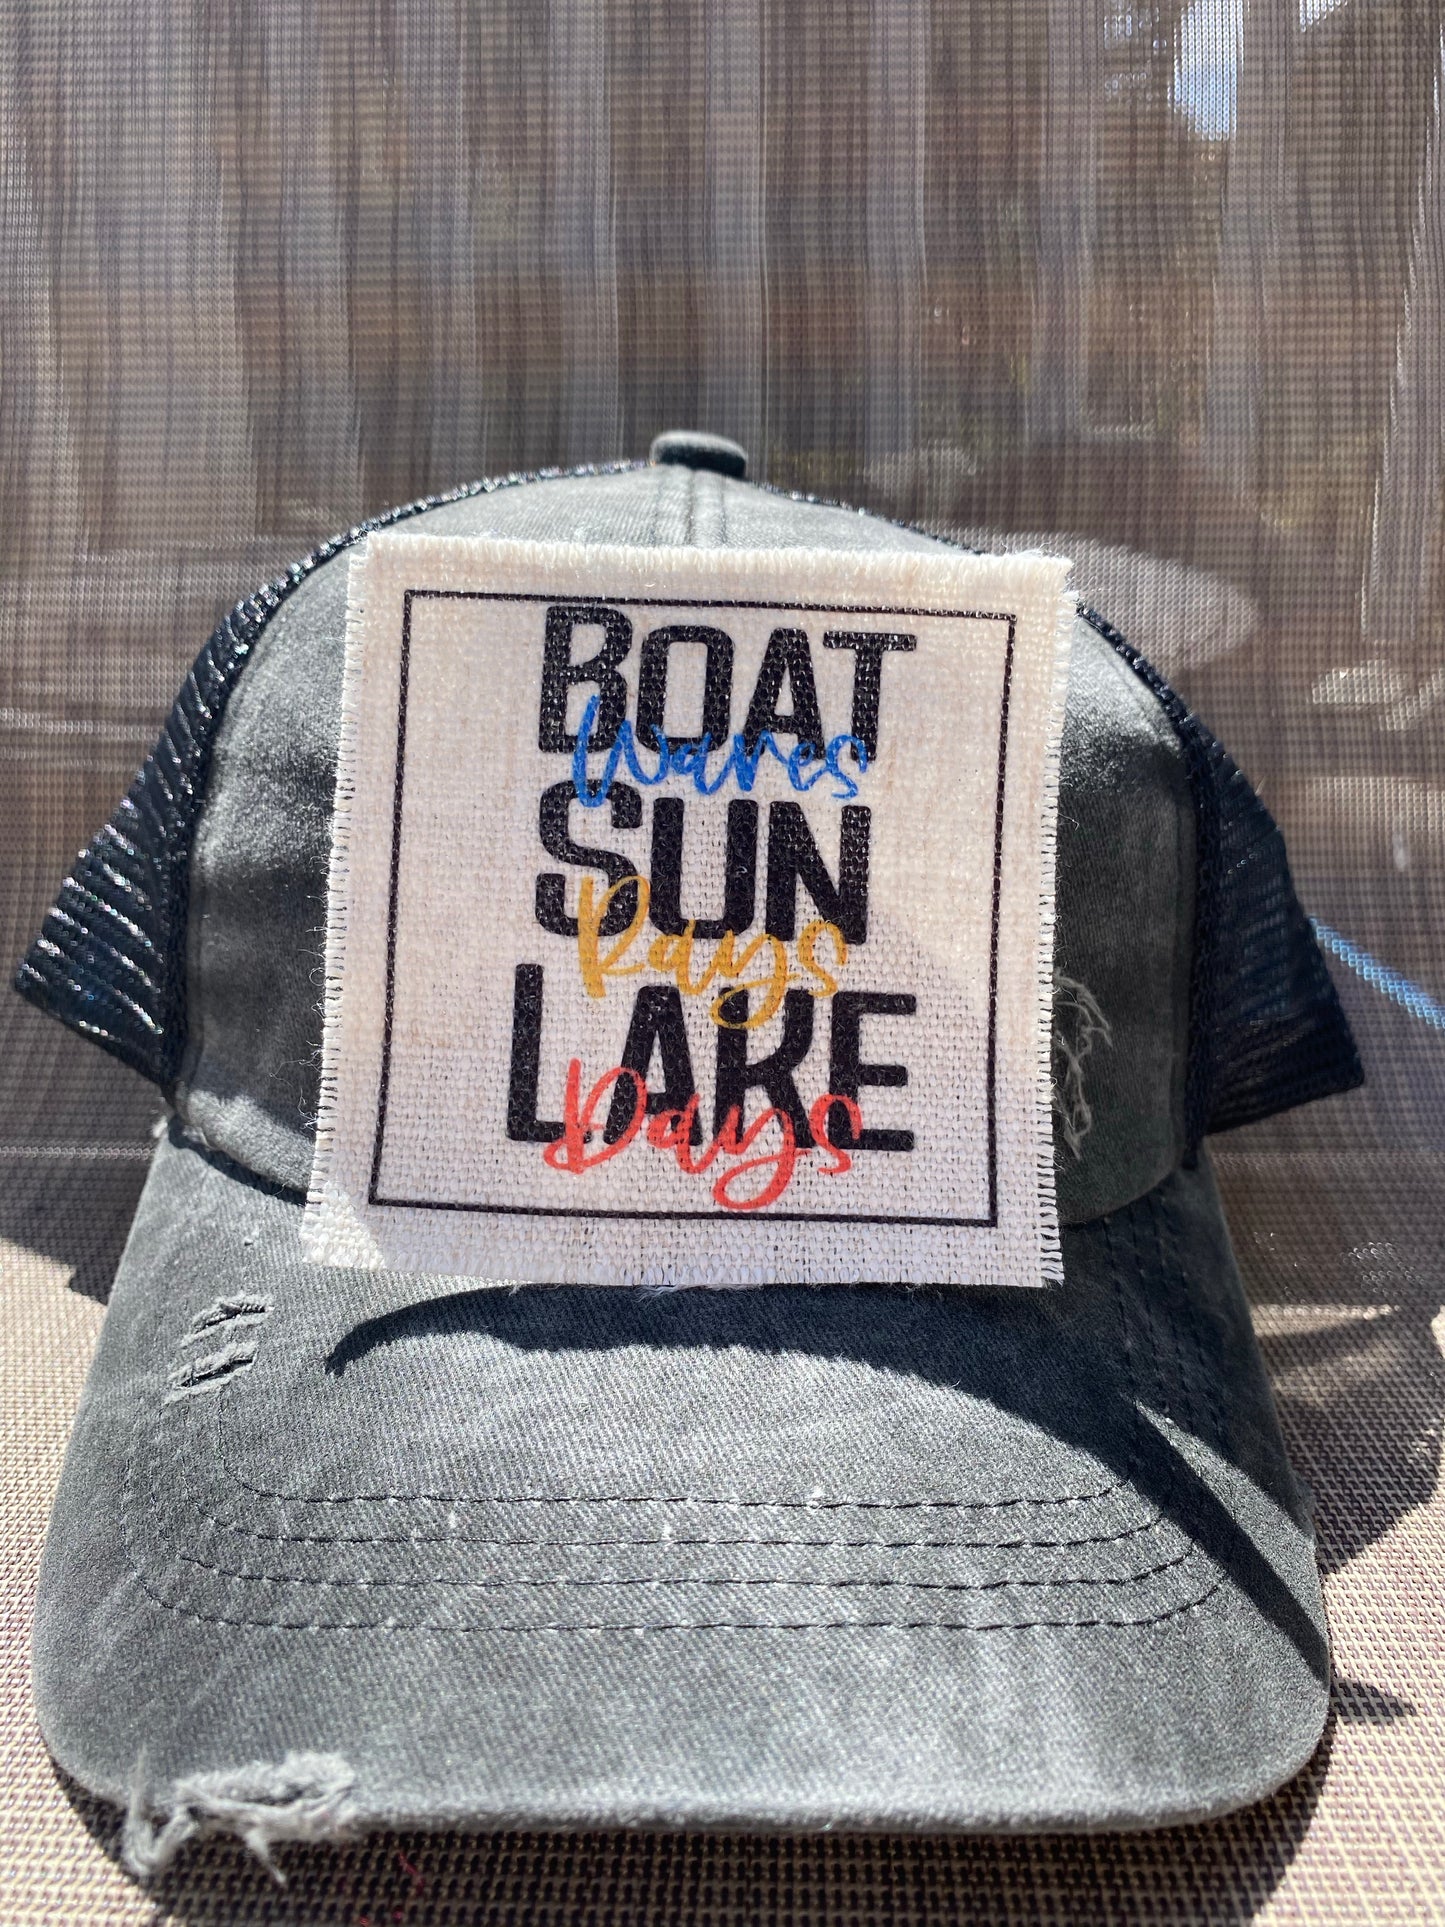 Boat Waves Sun Rays Lake Days Hat Patch